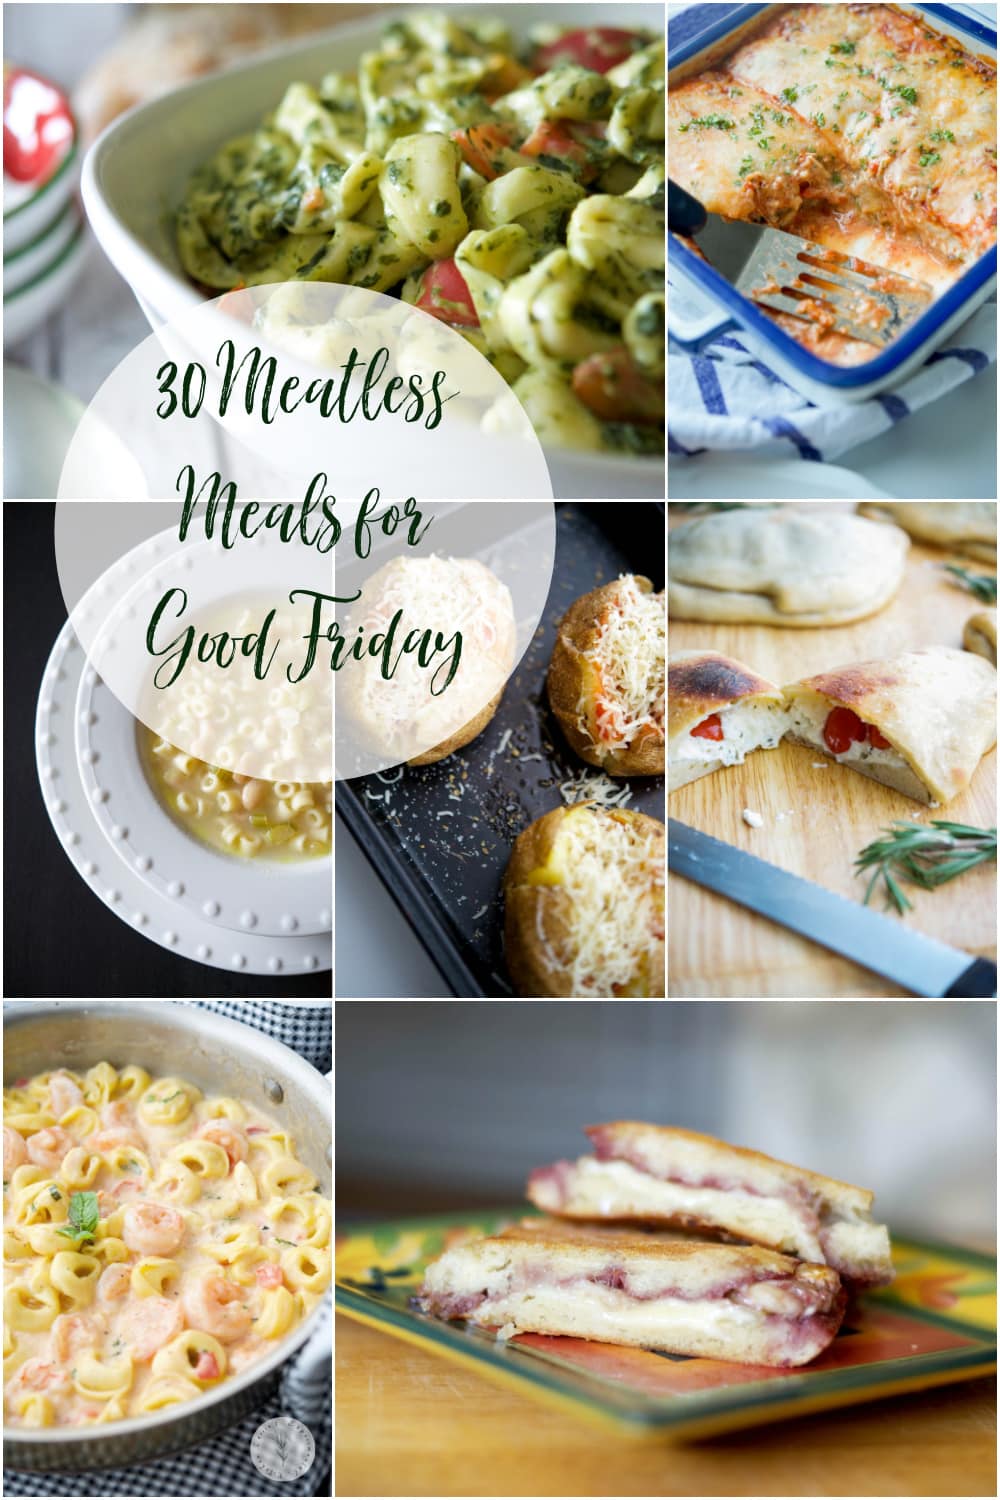 30 Meatless Meals for Good Friday | Carrie’s Experimental Kitchen